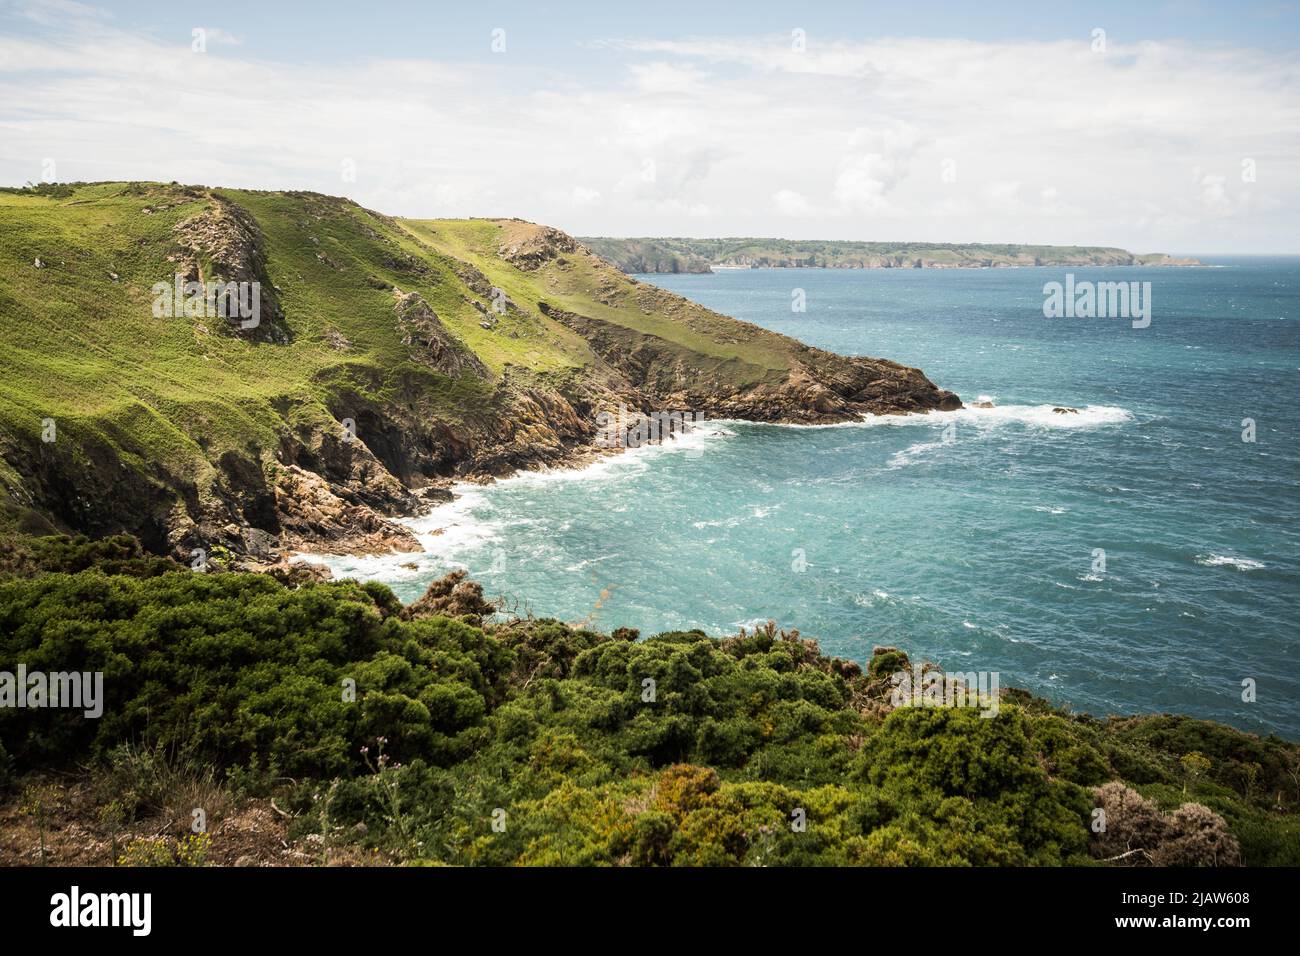 Landscapes and nature Jersey Island - Channel Island - Kanalinsen Stock Photo